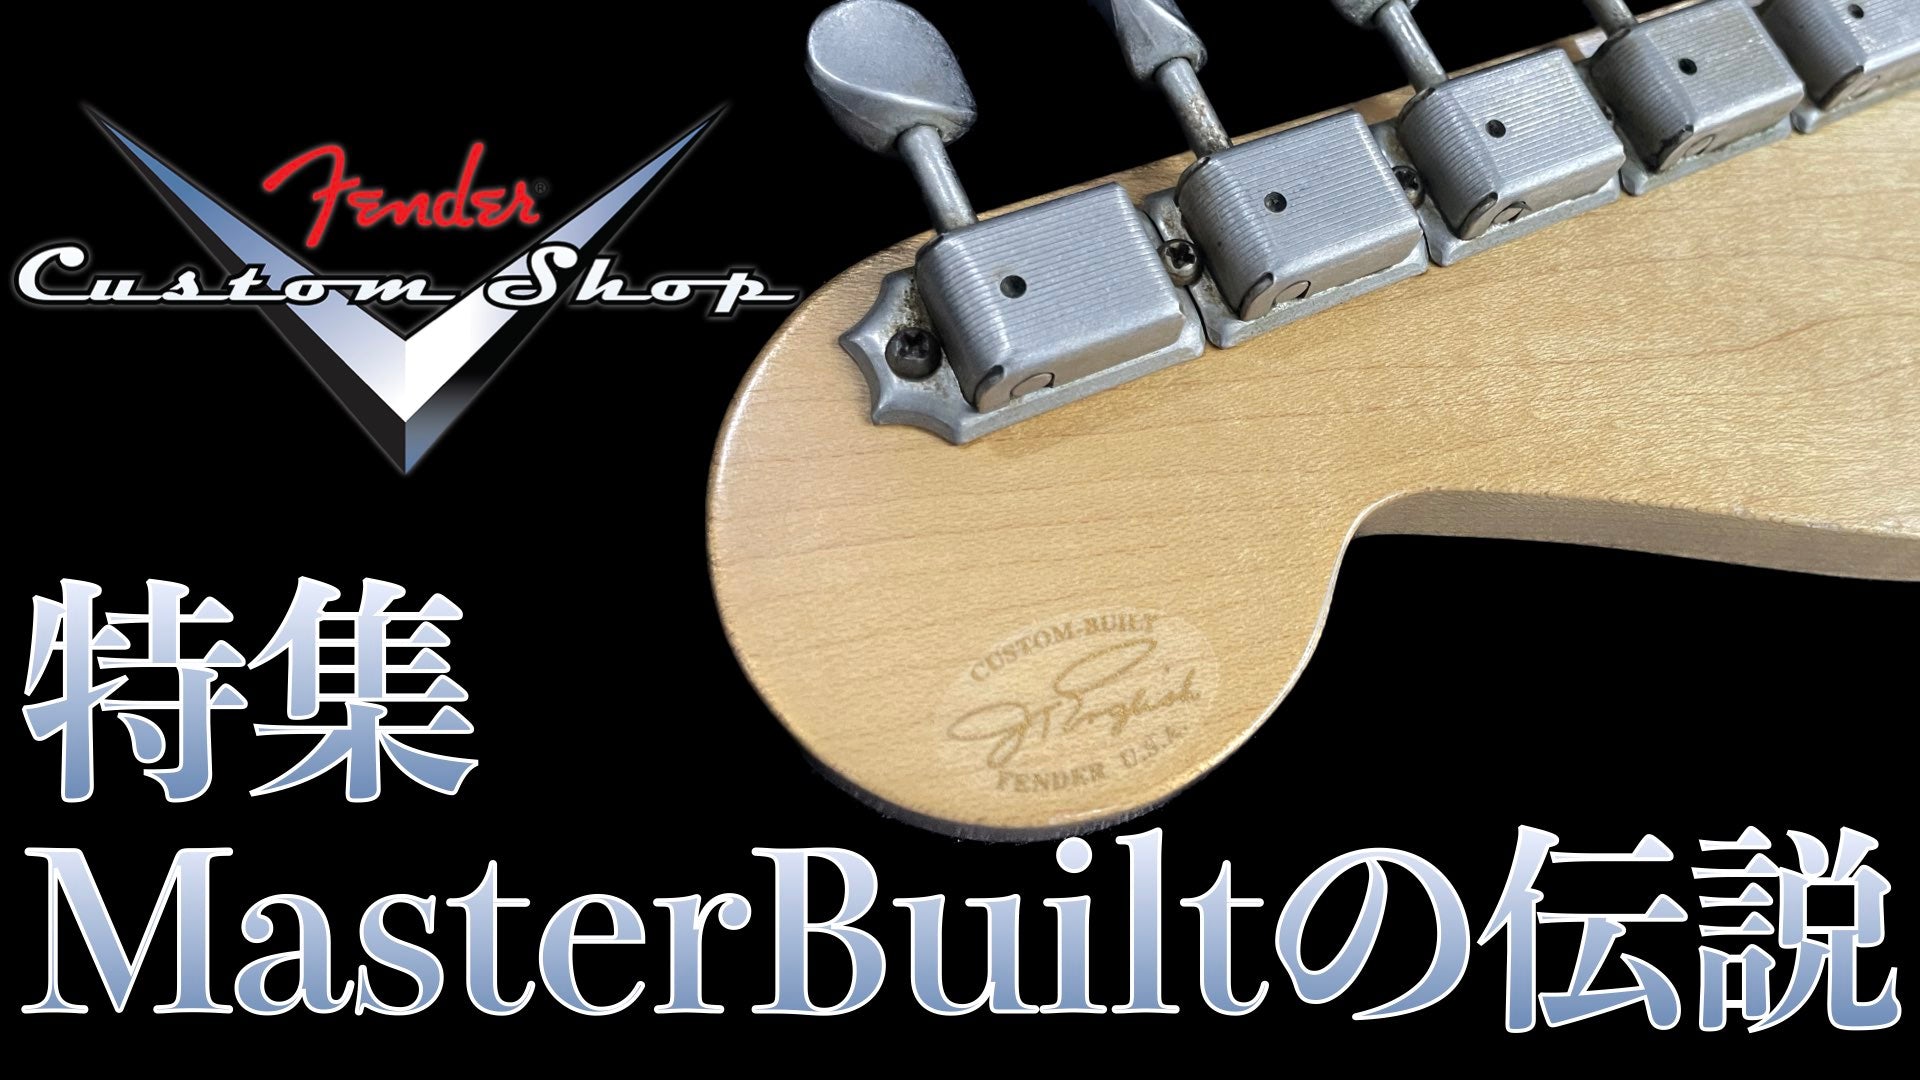 Musical Instruments Music Store. Shop for Guitars, Drums,  Amplifiers and Equipment.